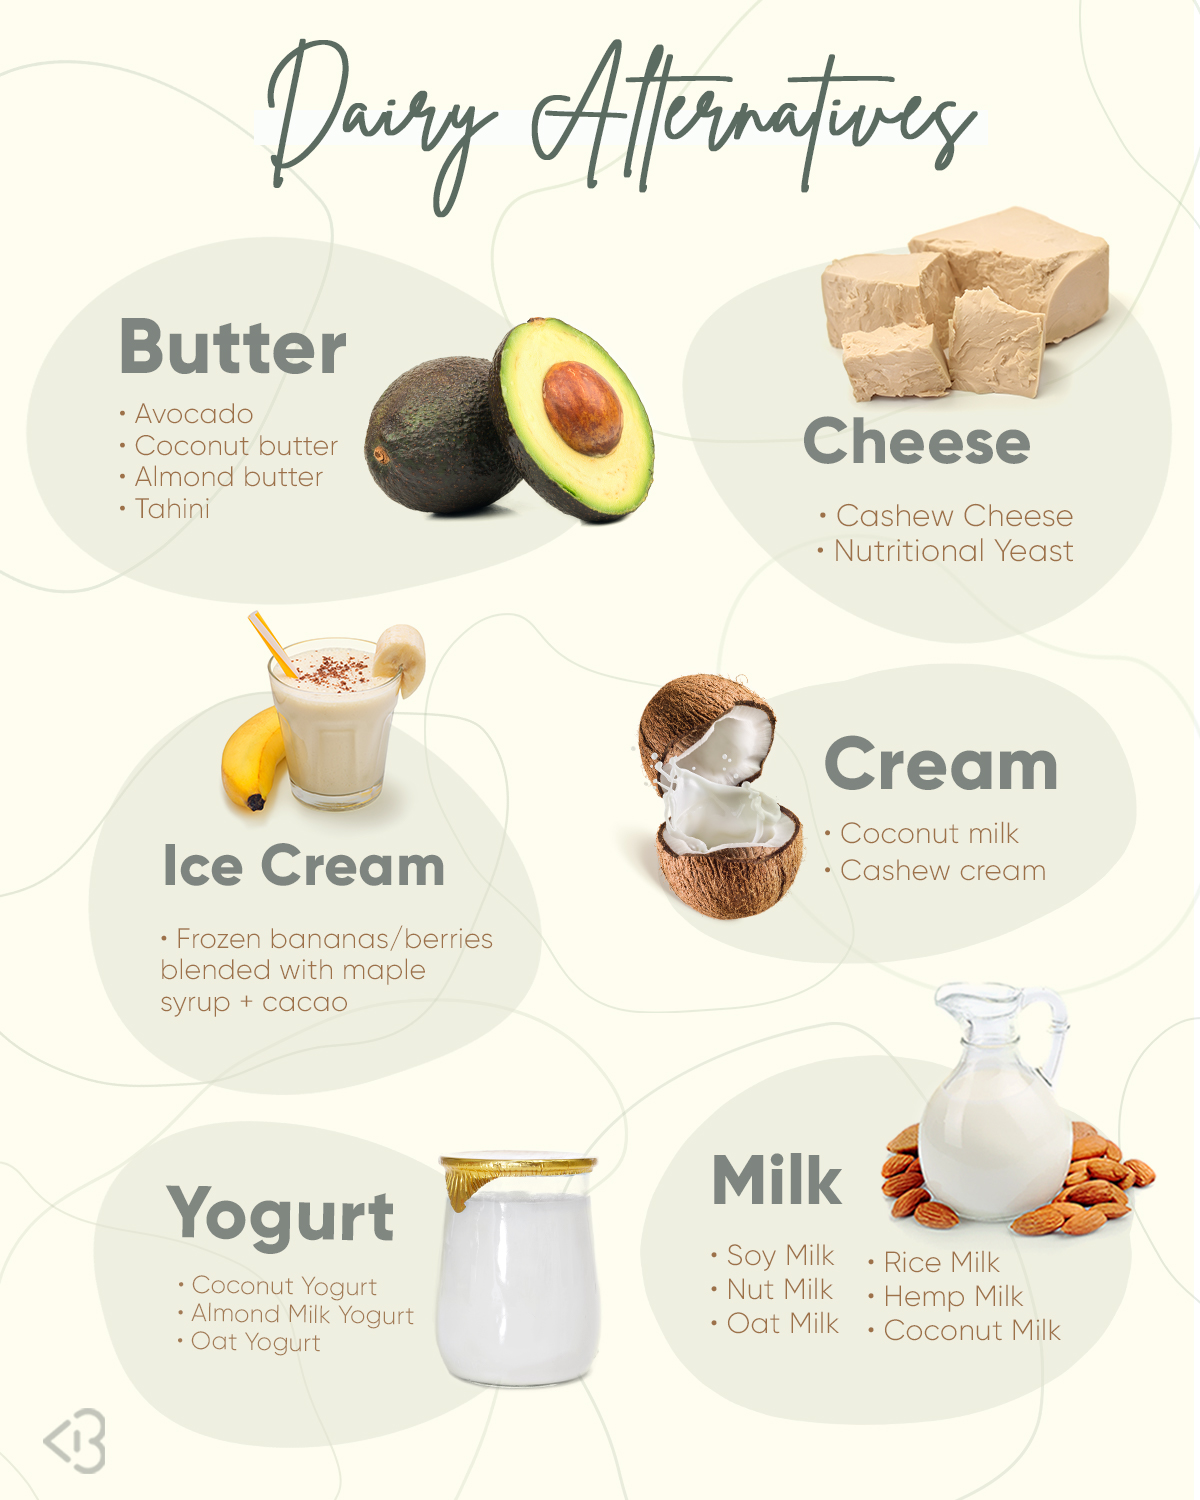 Dairy-free substitutes